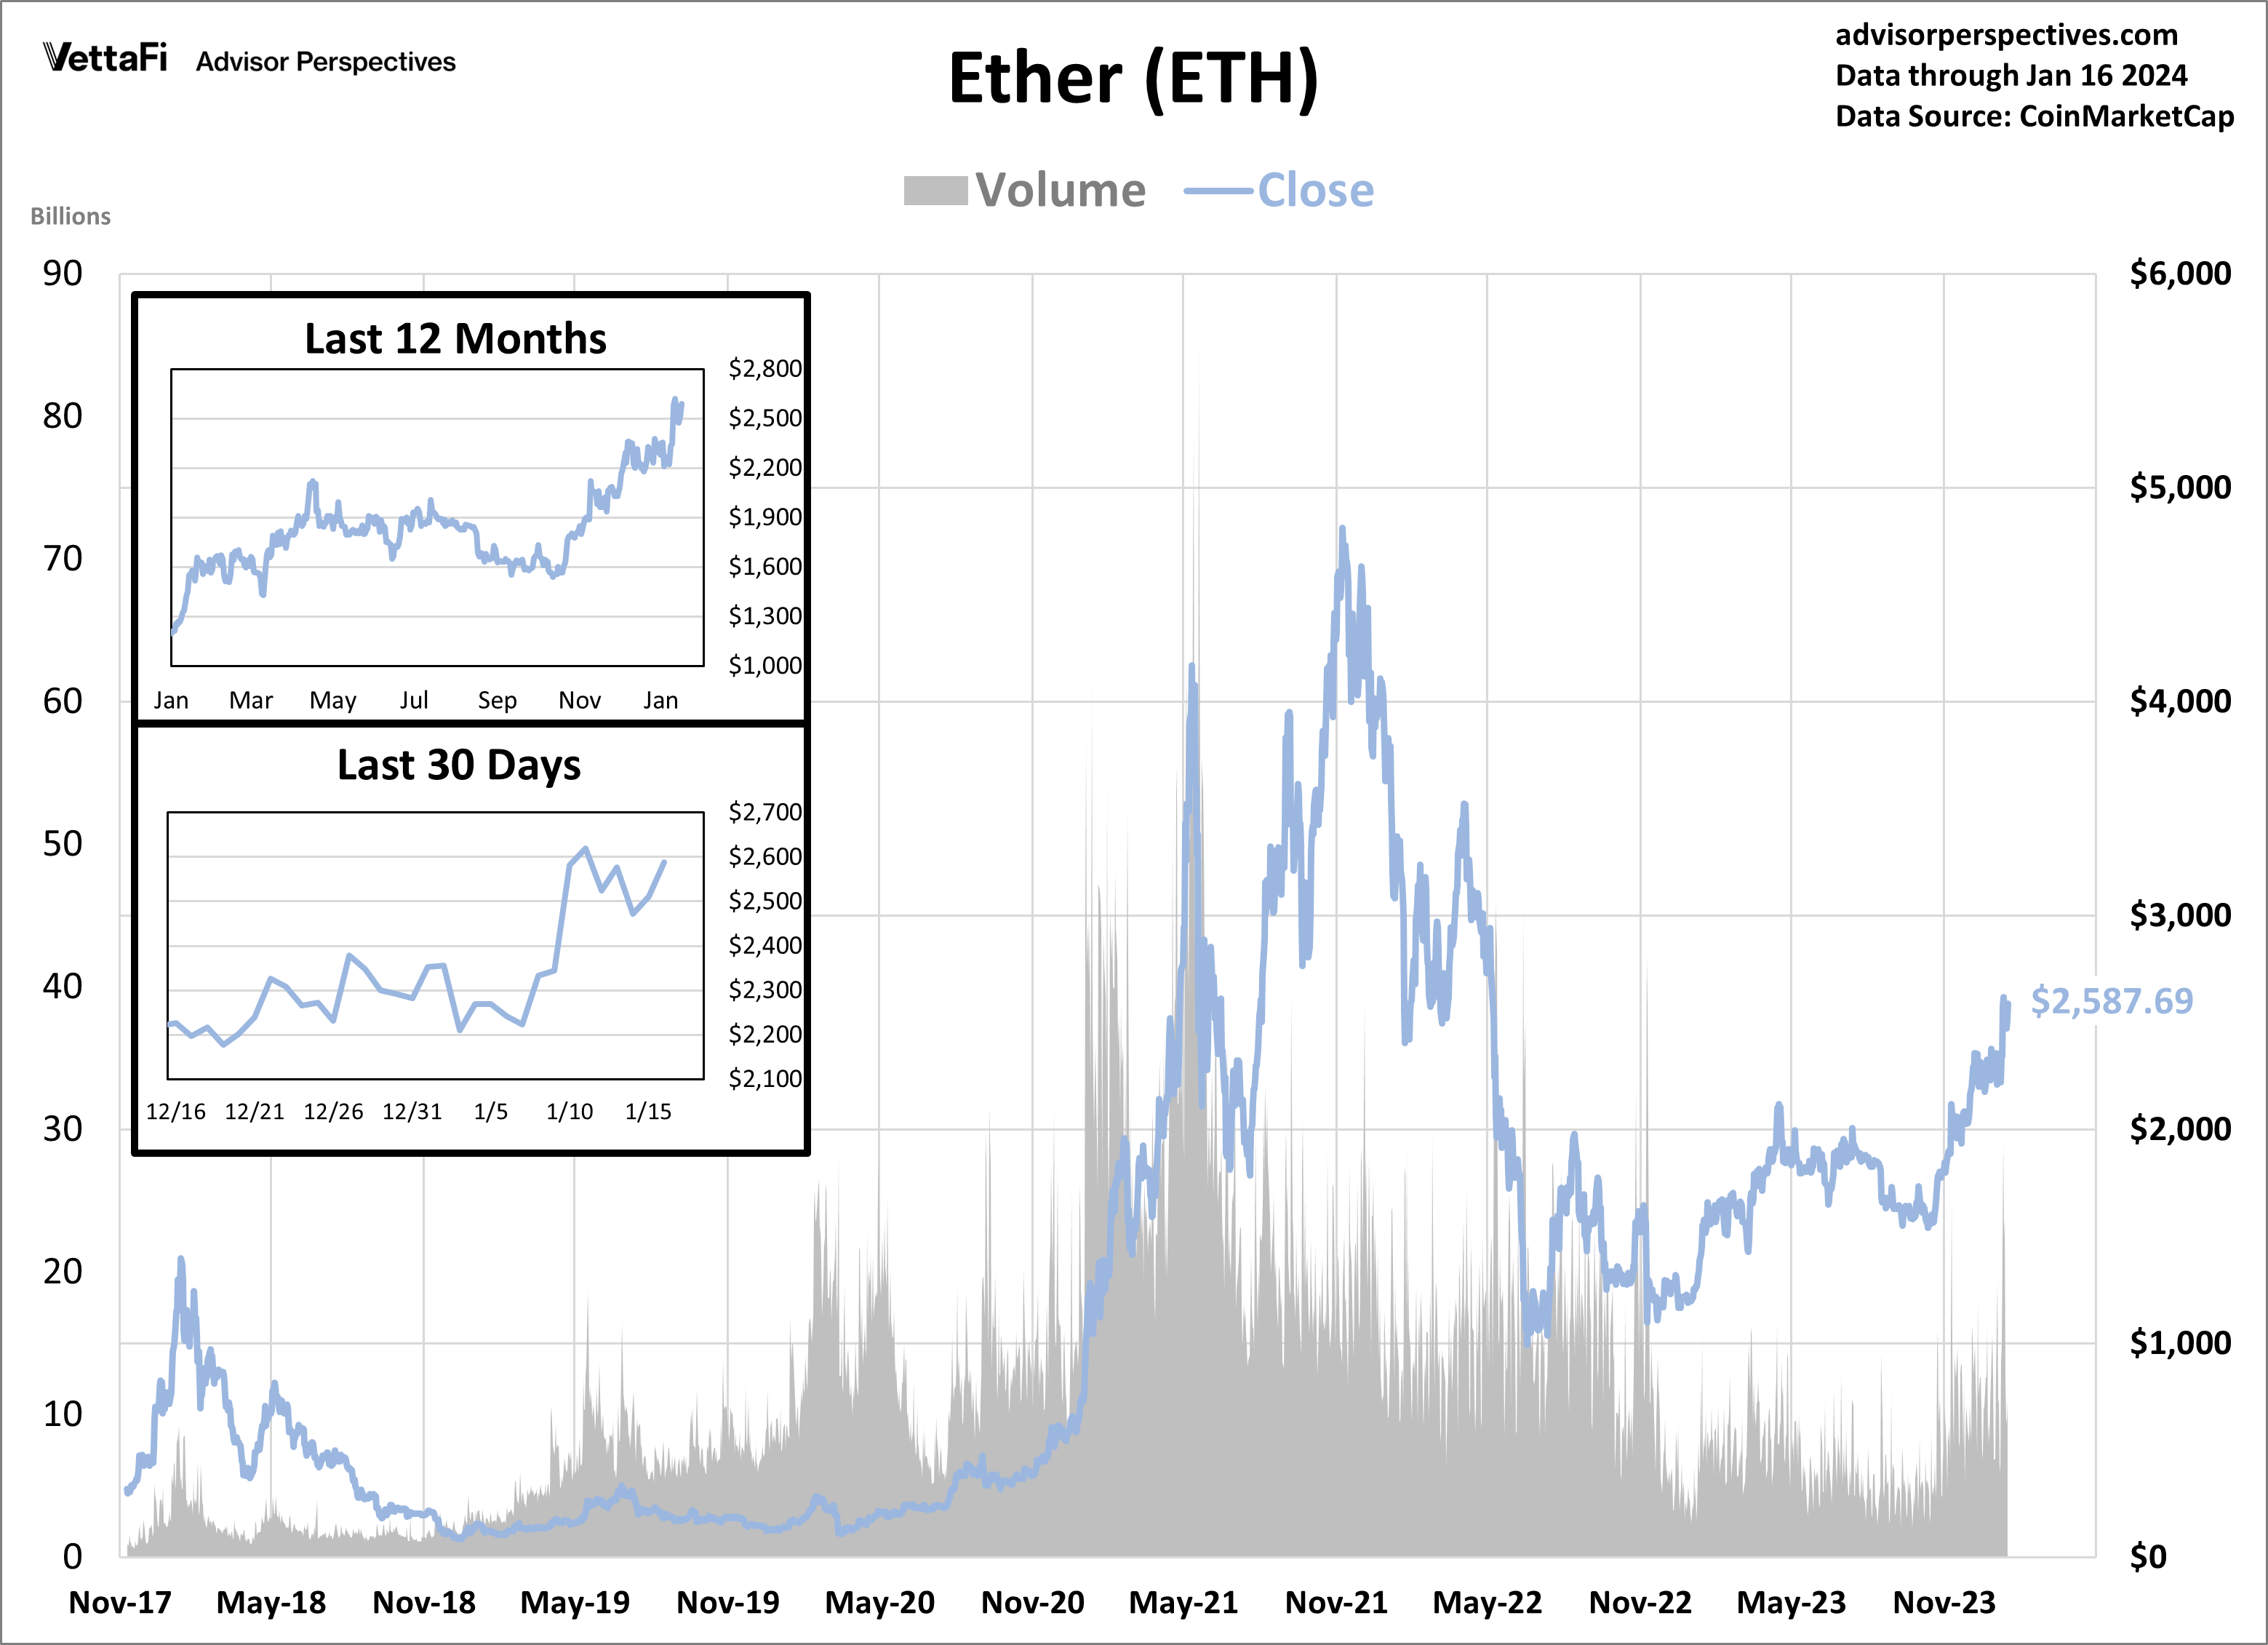 Ether - Volume and Close